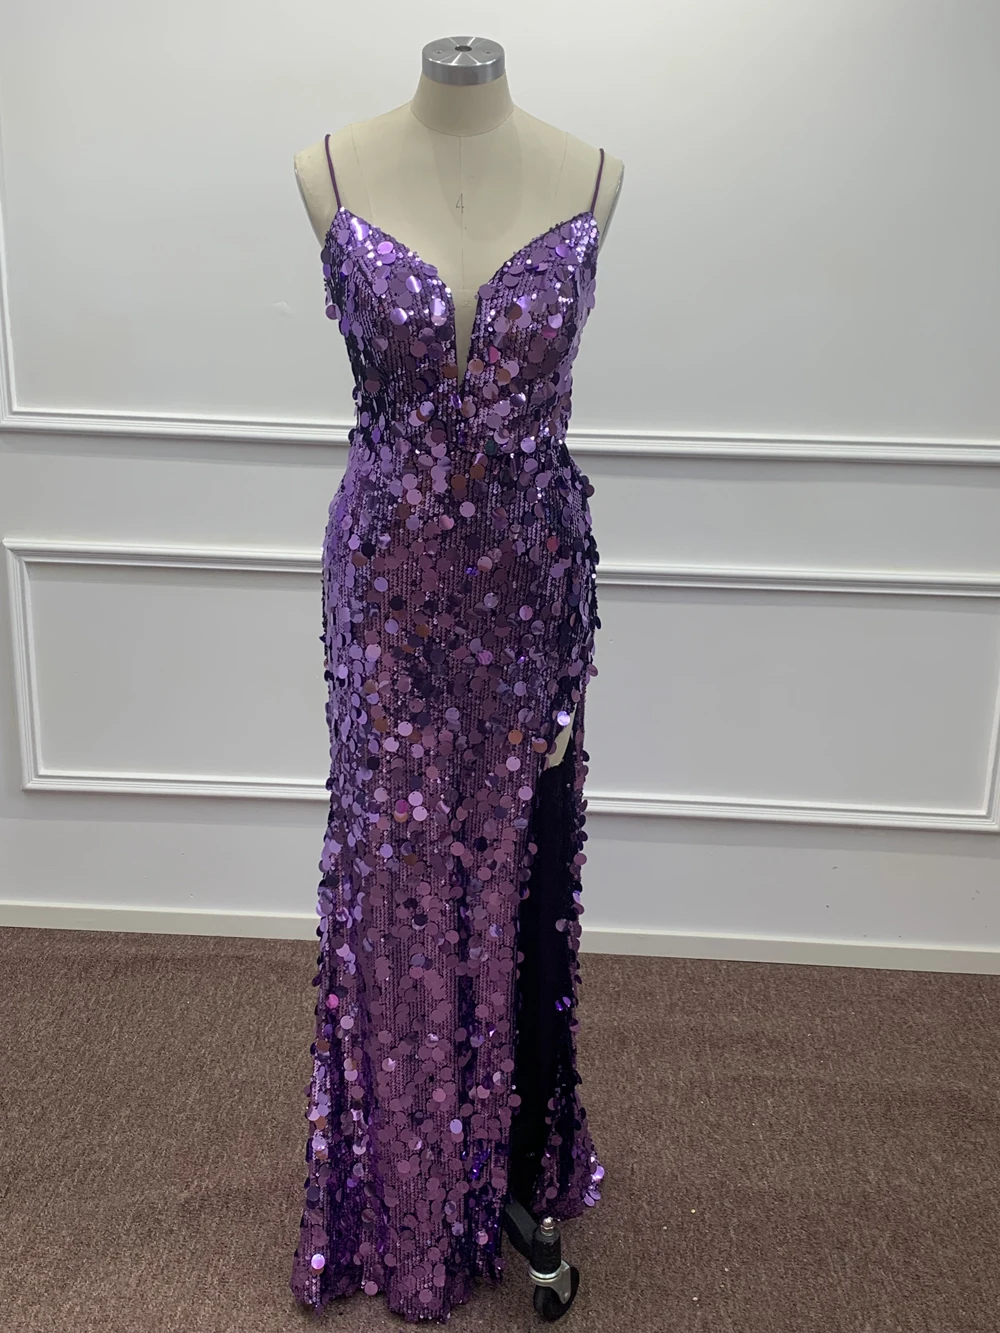 

Mermaid Sexy High Slit Backless Evening Dresses V Neck Sparkly Purple Sequined Spaghetti Straps Prom Gowns Formal Party Vestidos